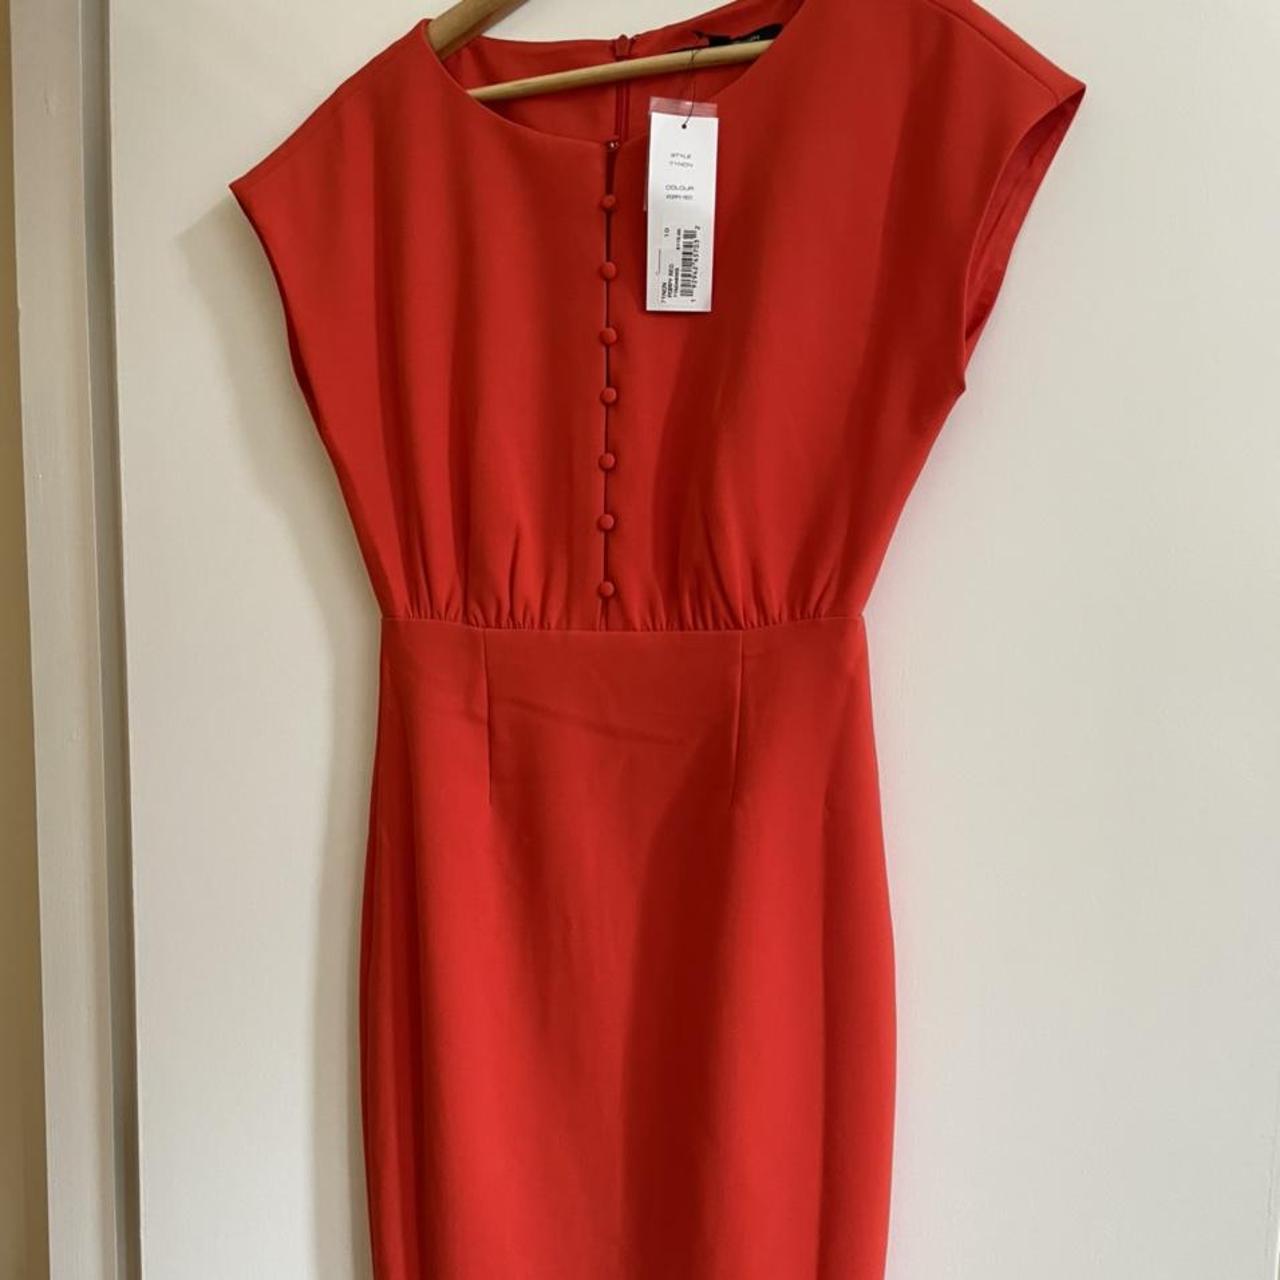 French Connection red dress size 10. Ideal for the... - Depop